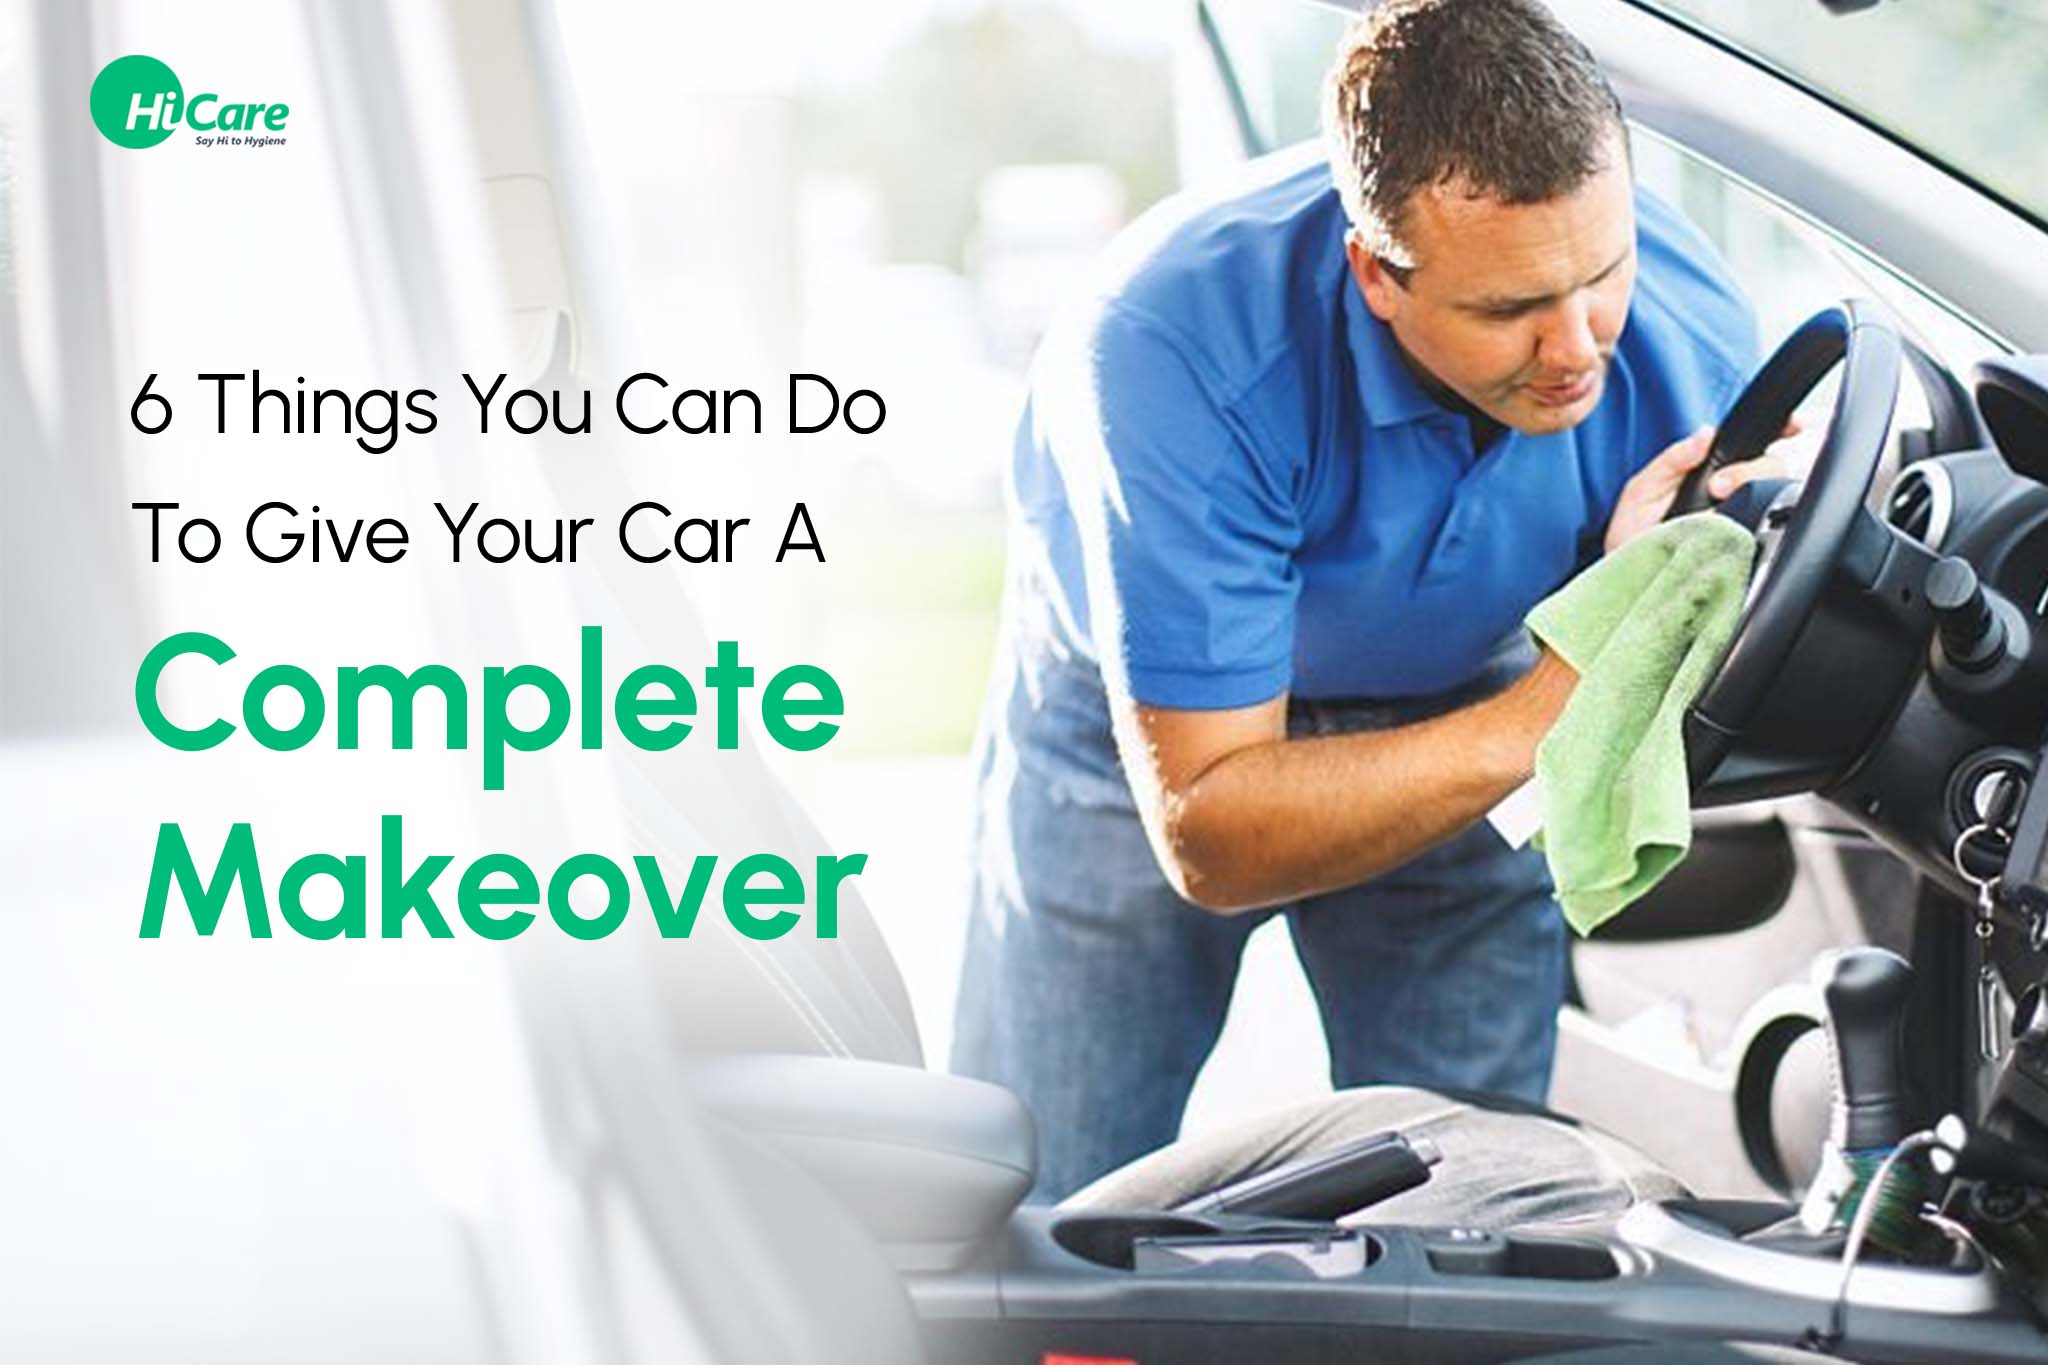 6 Things You Can Do To Give Your Car A Complete Makeover